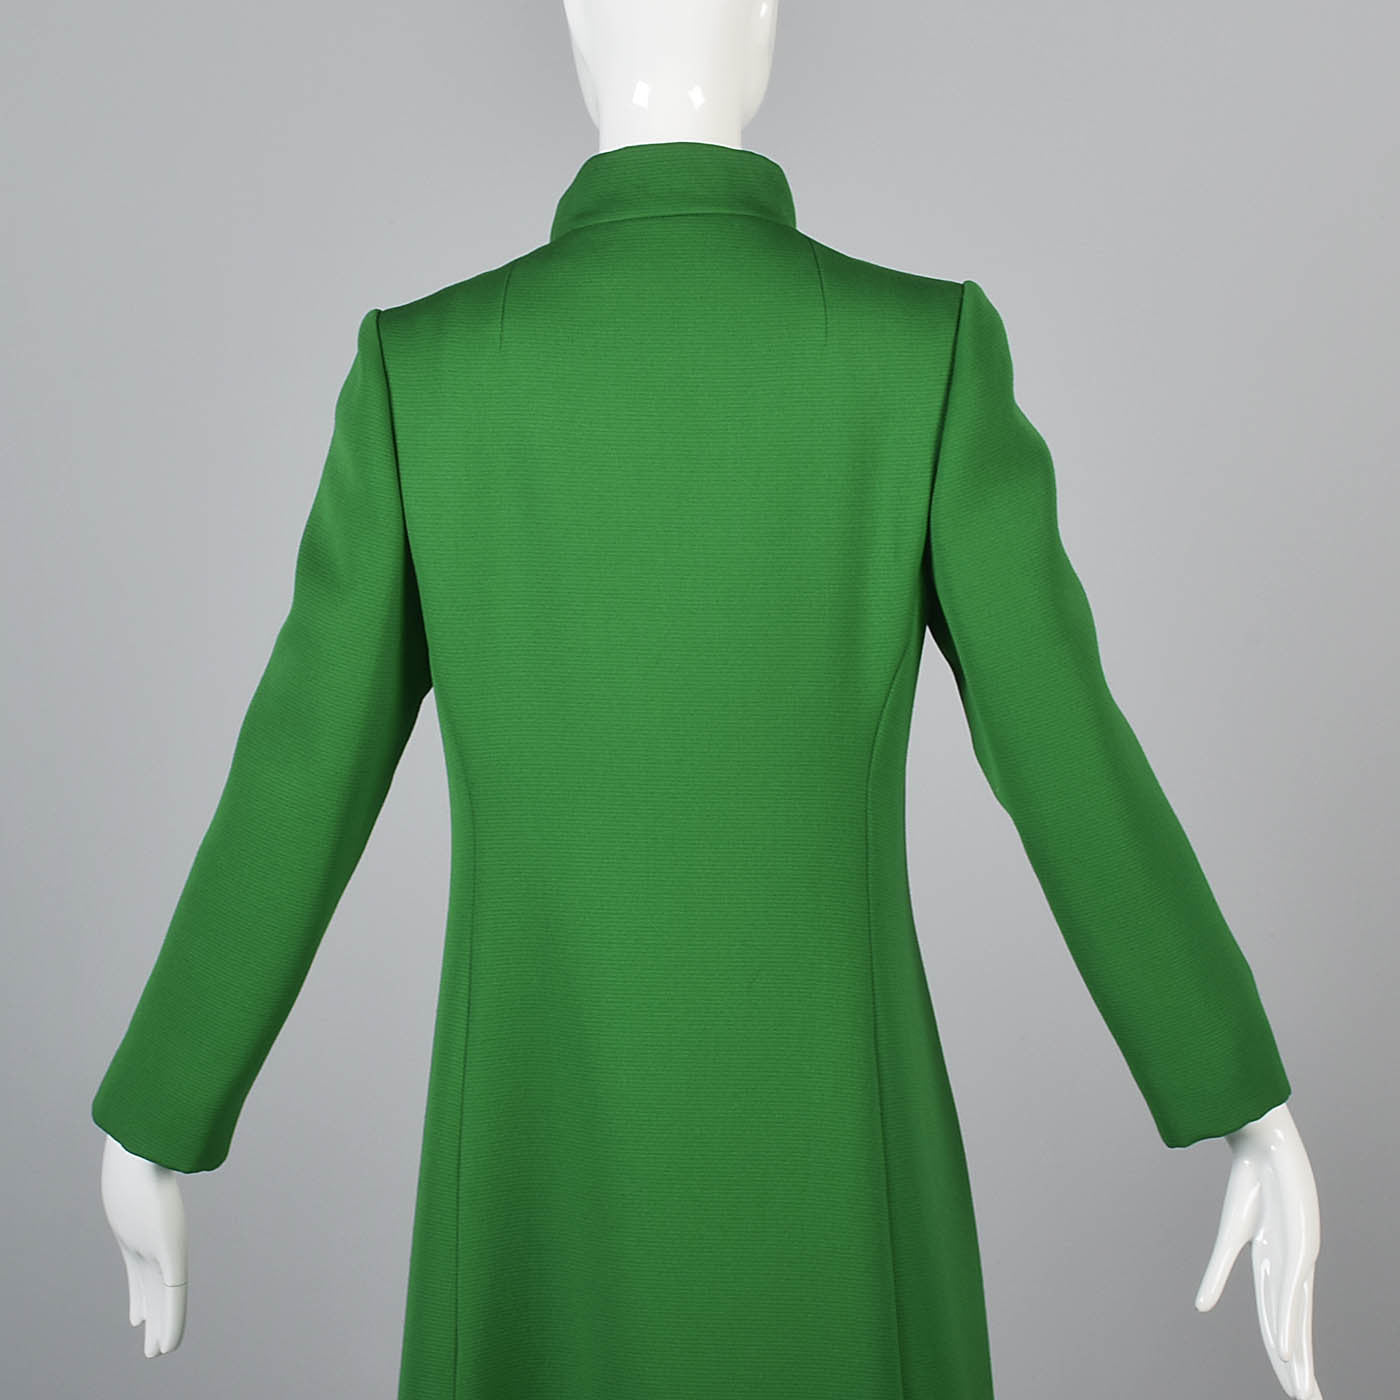 1960s Show Stopping Kelly Green Maxi Coat from Saks Fifth Avenue